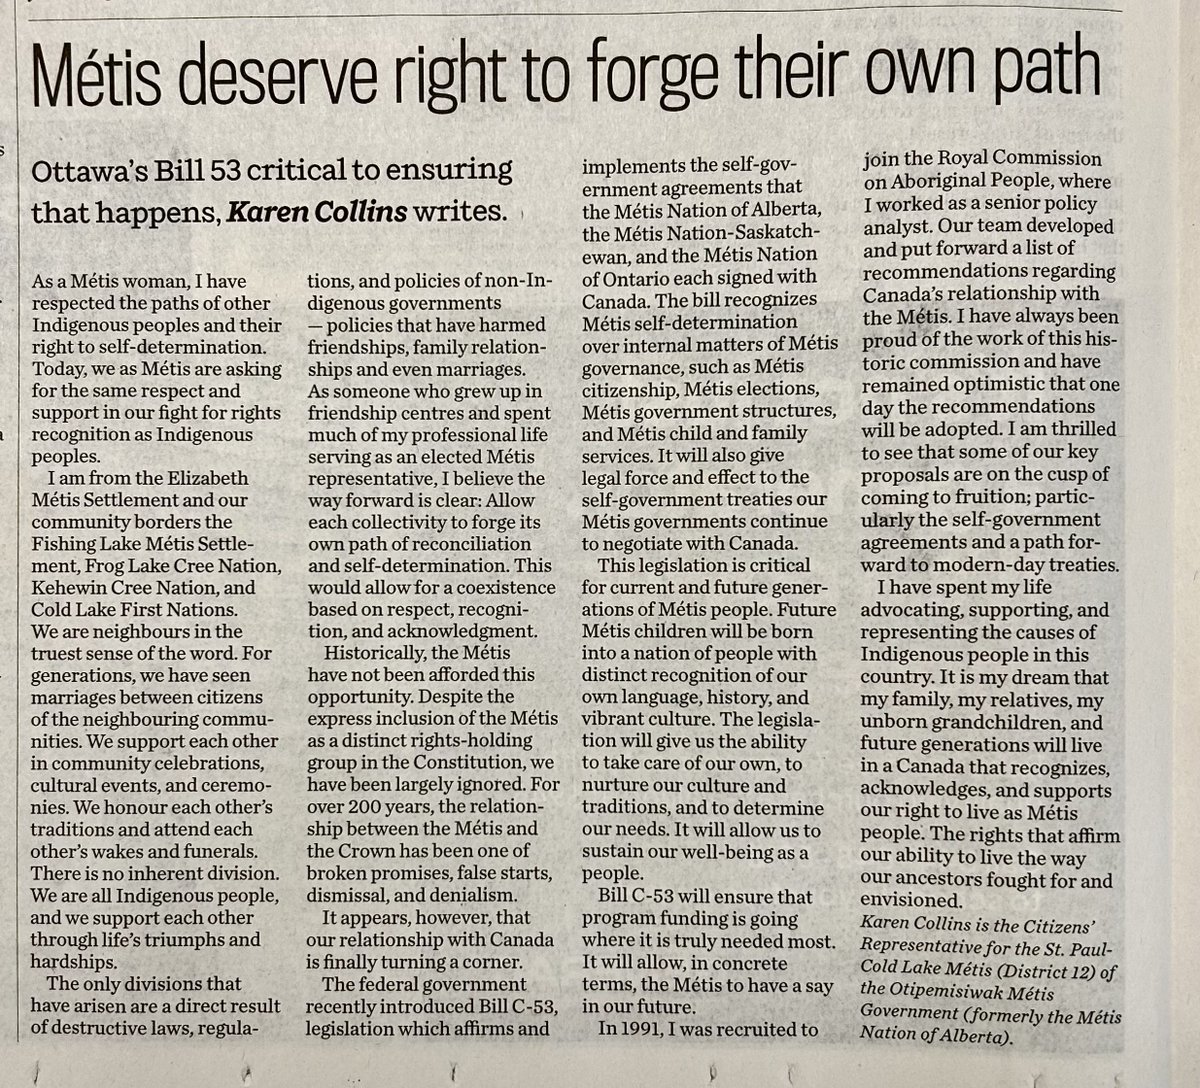 Featured in the Edmonton Journal! 👀 “Métis deserve the right to forge their own path of reconciliation and self-determination” – Karen Collins, Citizens’ Representative for the St. Paul-Cold Lake Métis. Read the article here: edmontonjournal.com/opinion/column…